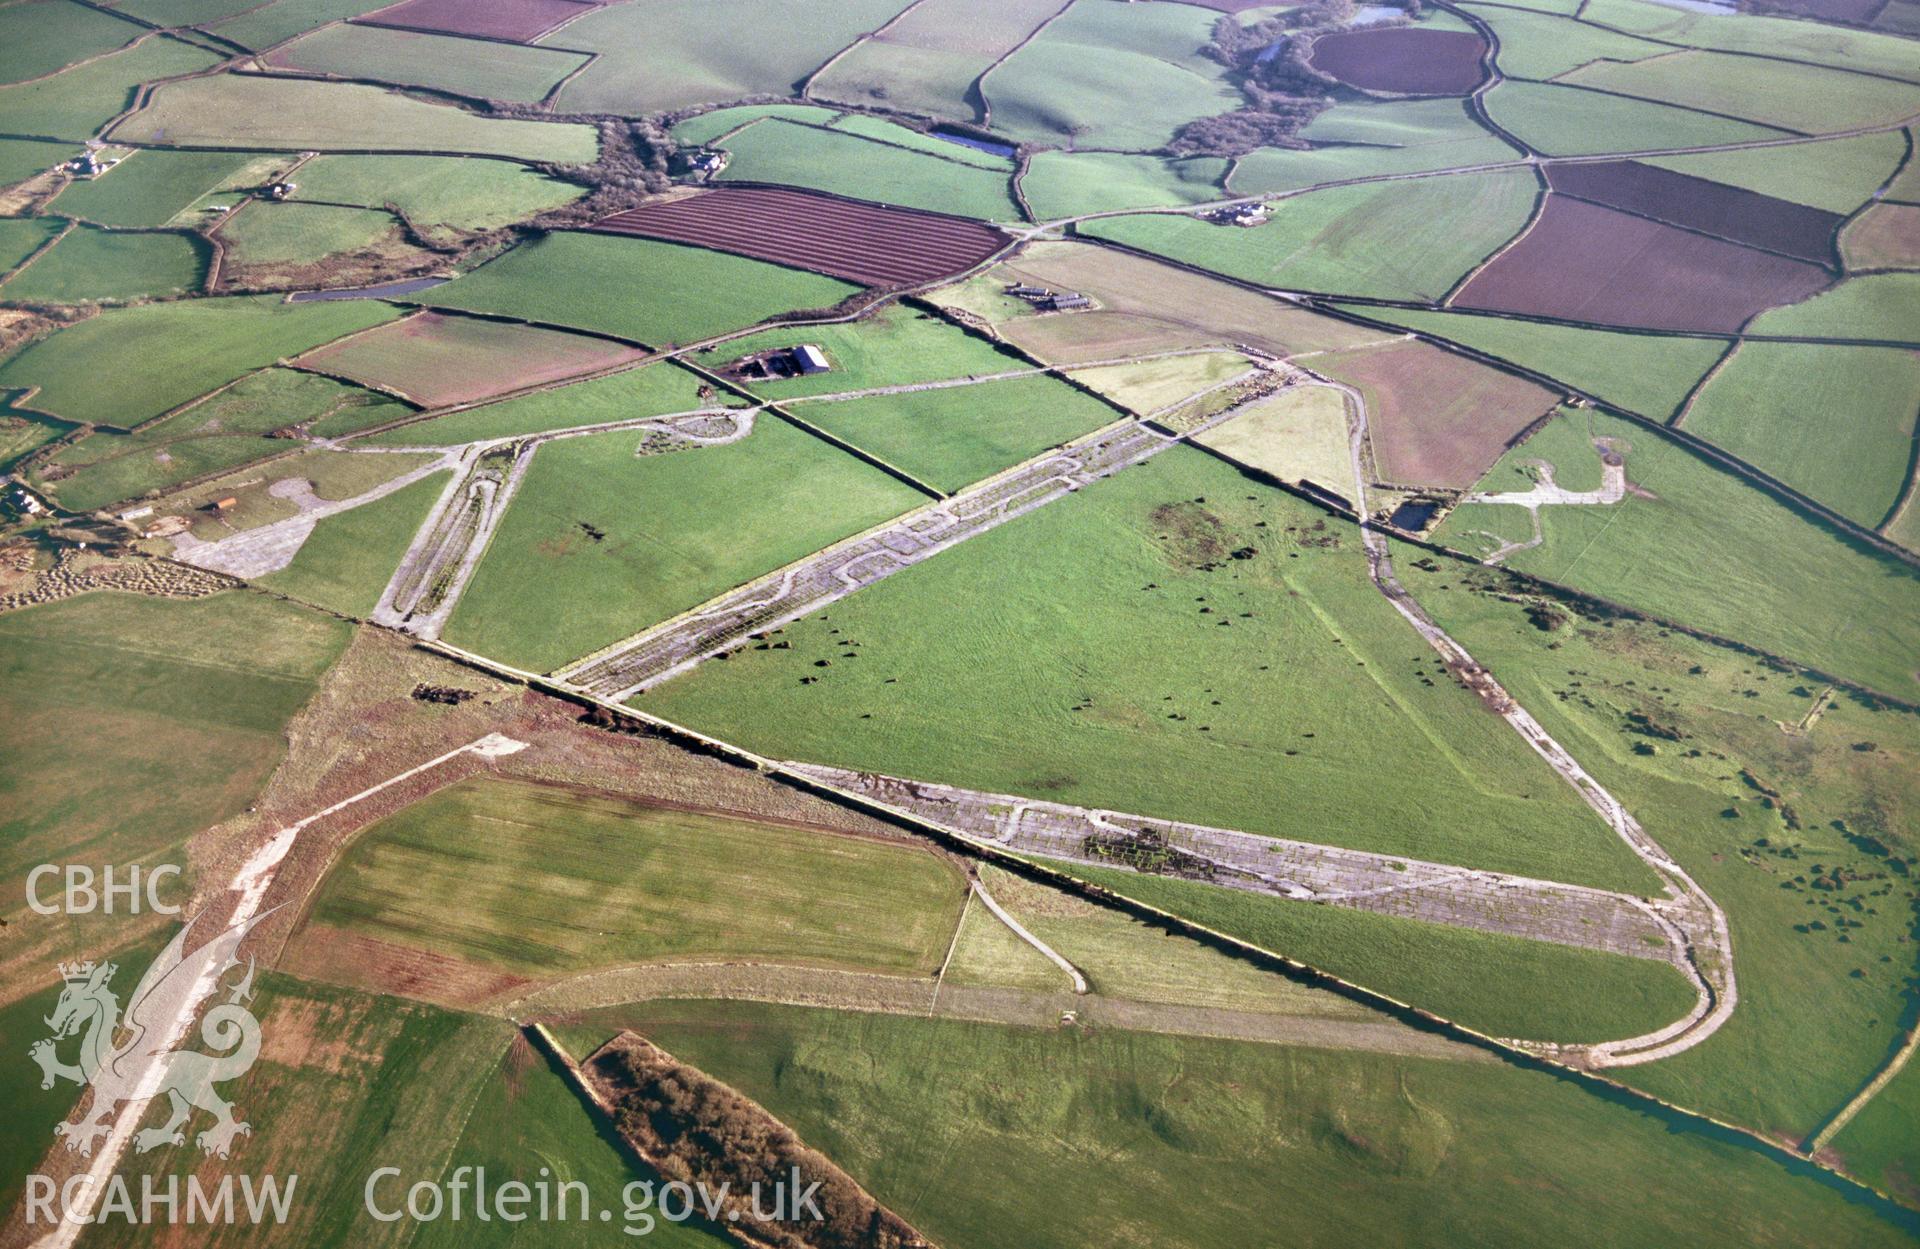 Slide of RCAHMW colour oblique aerial photograph showing Talbenny Aerodrome, taken by Toby Driver, 2001.